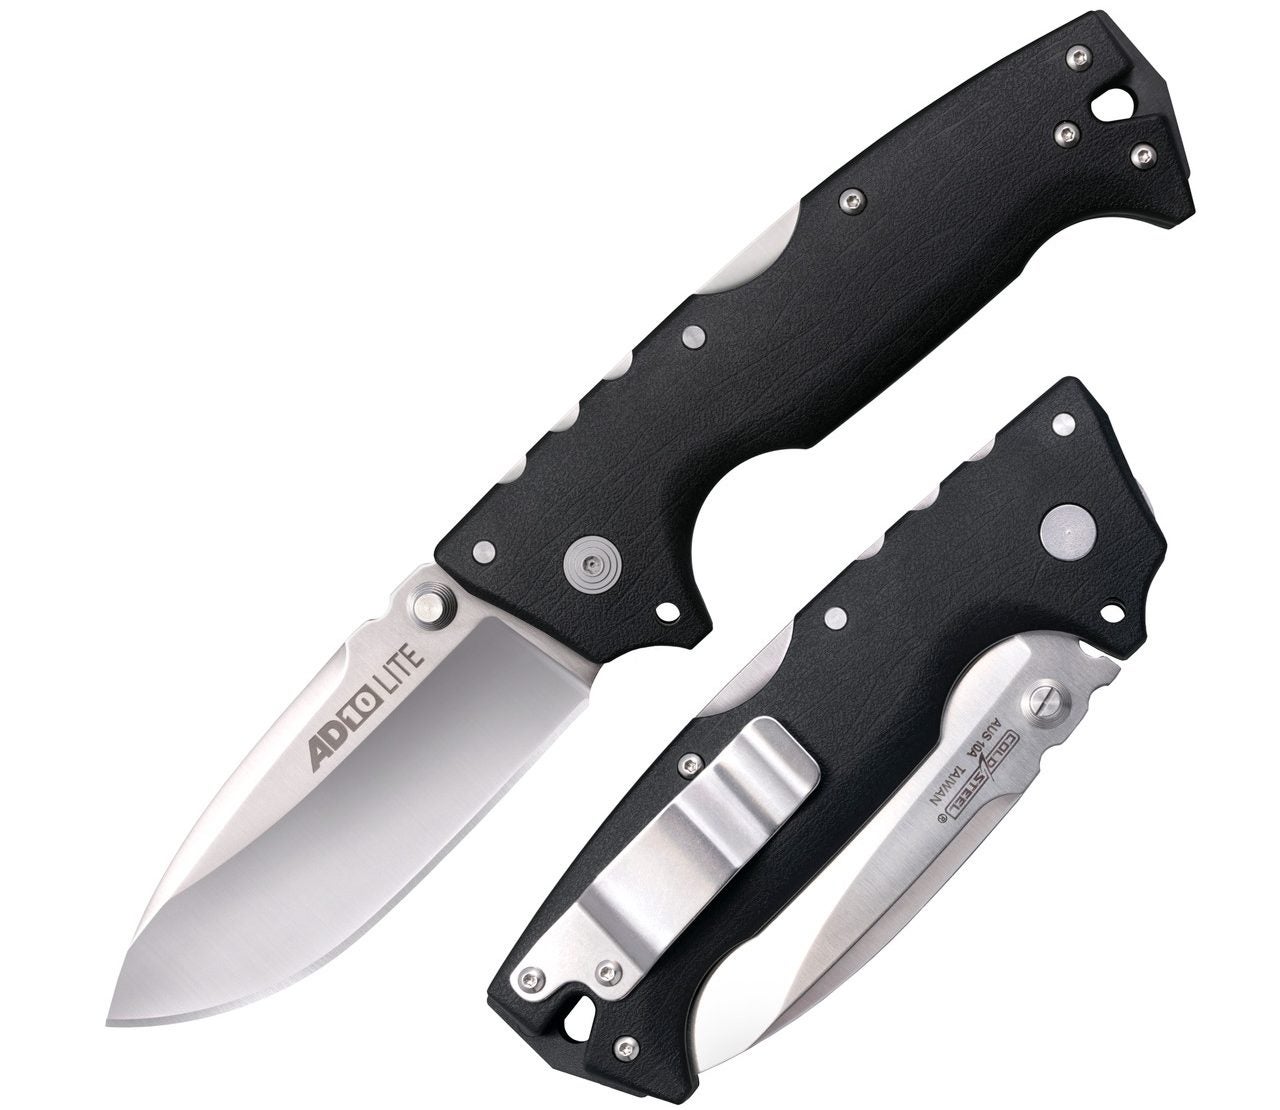 New AD-10 Lite Drop Point and Tanto Blades from Cold Steel